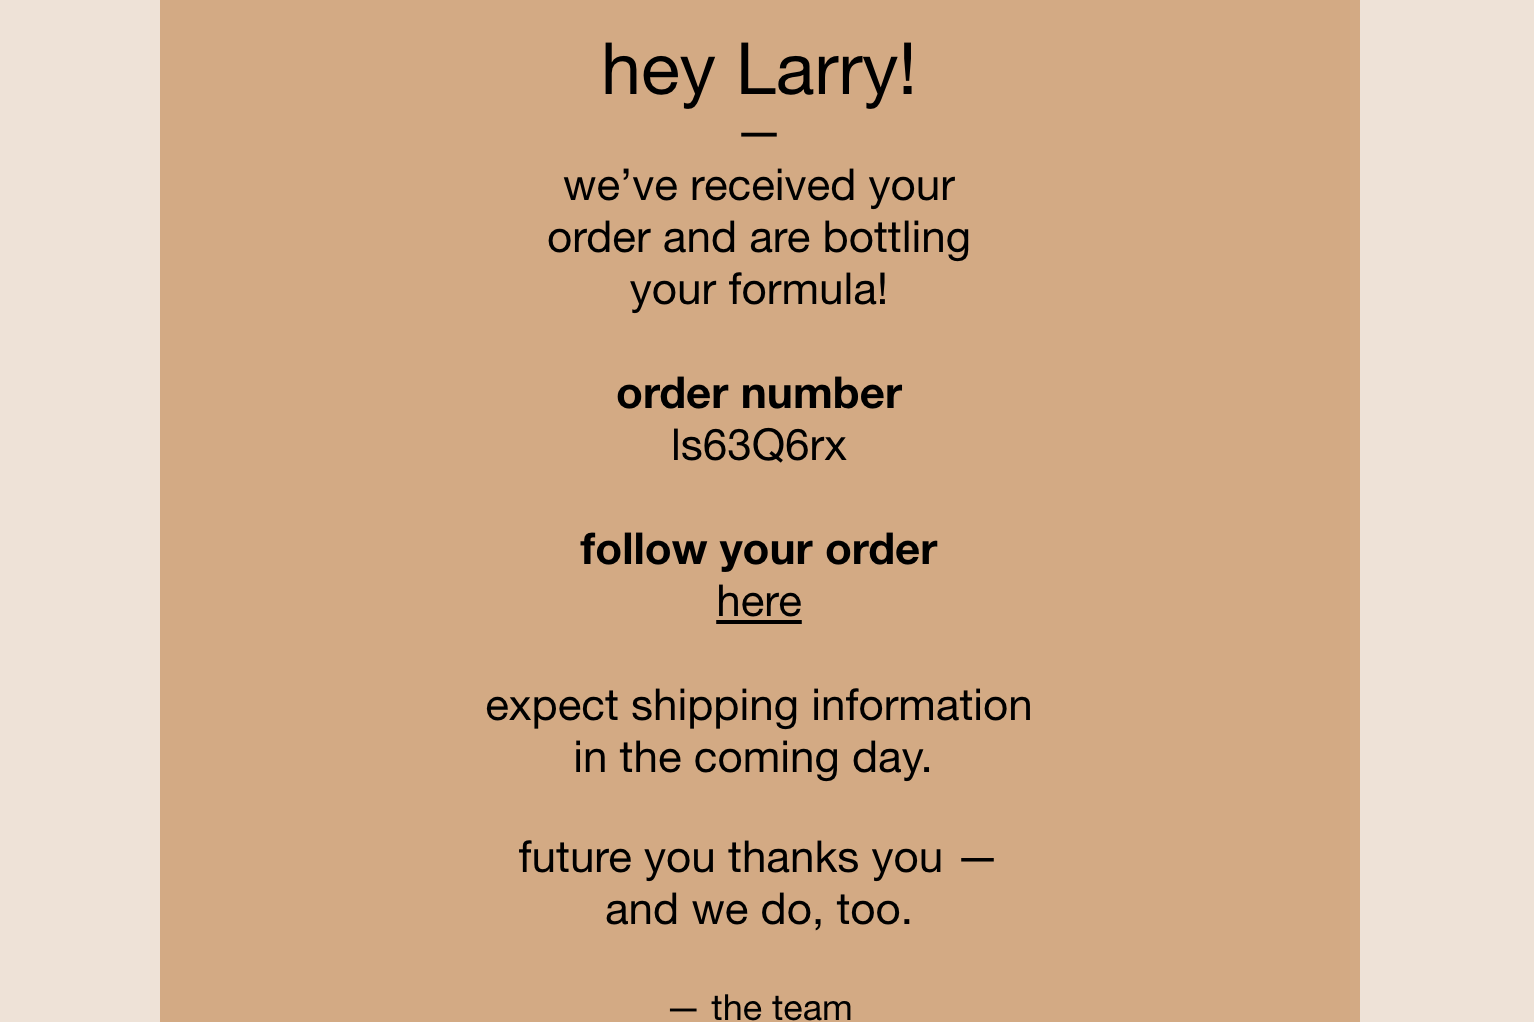 Another confirmation for my order